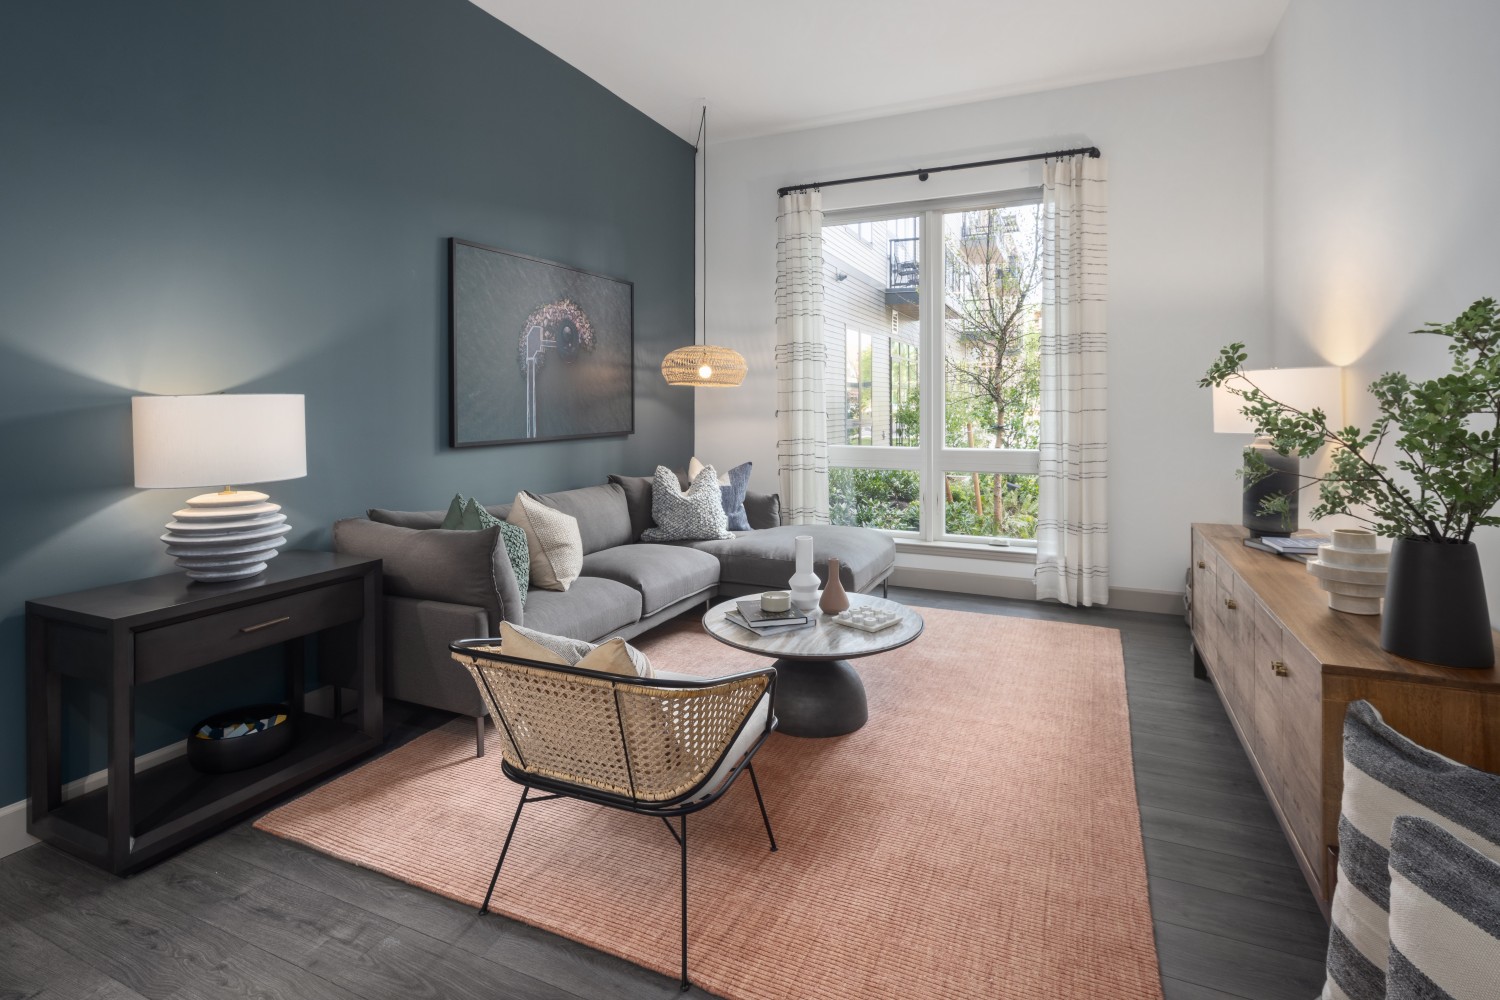 NorthLight at Edge on Hudson : Bright Natural Light in Every Living Room